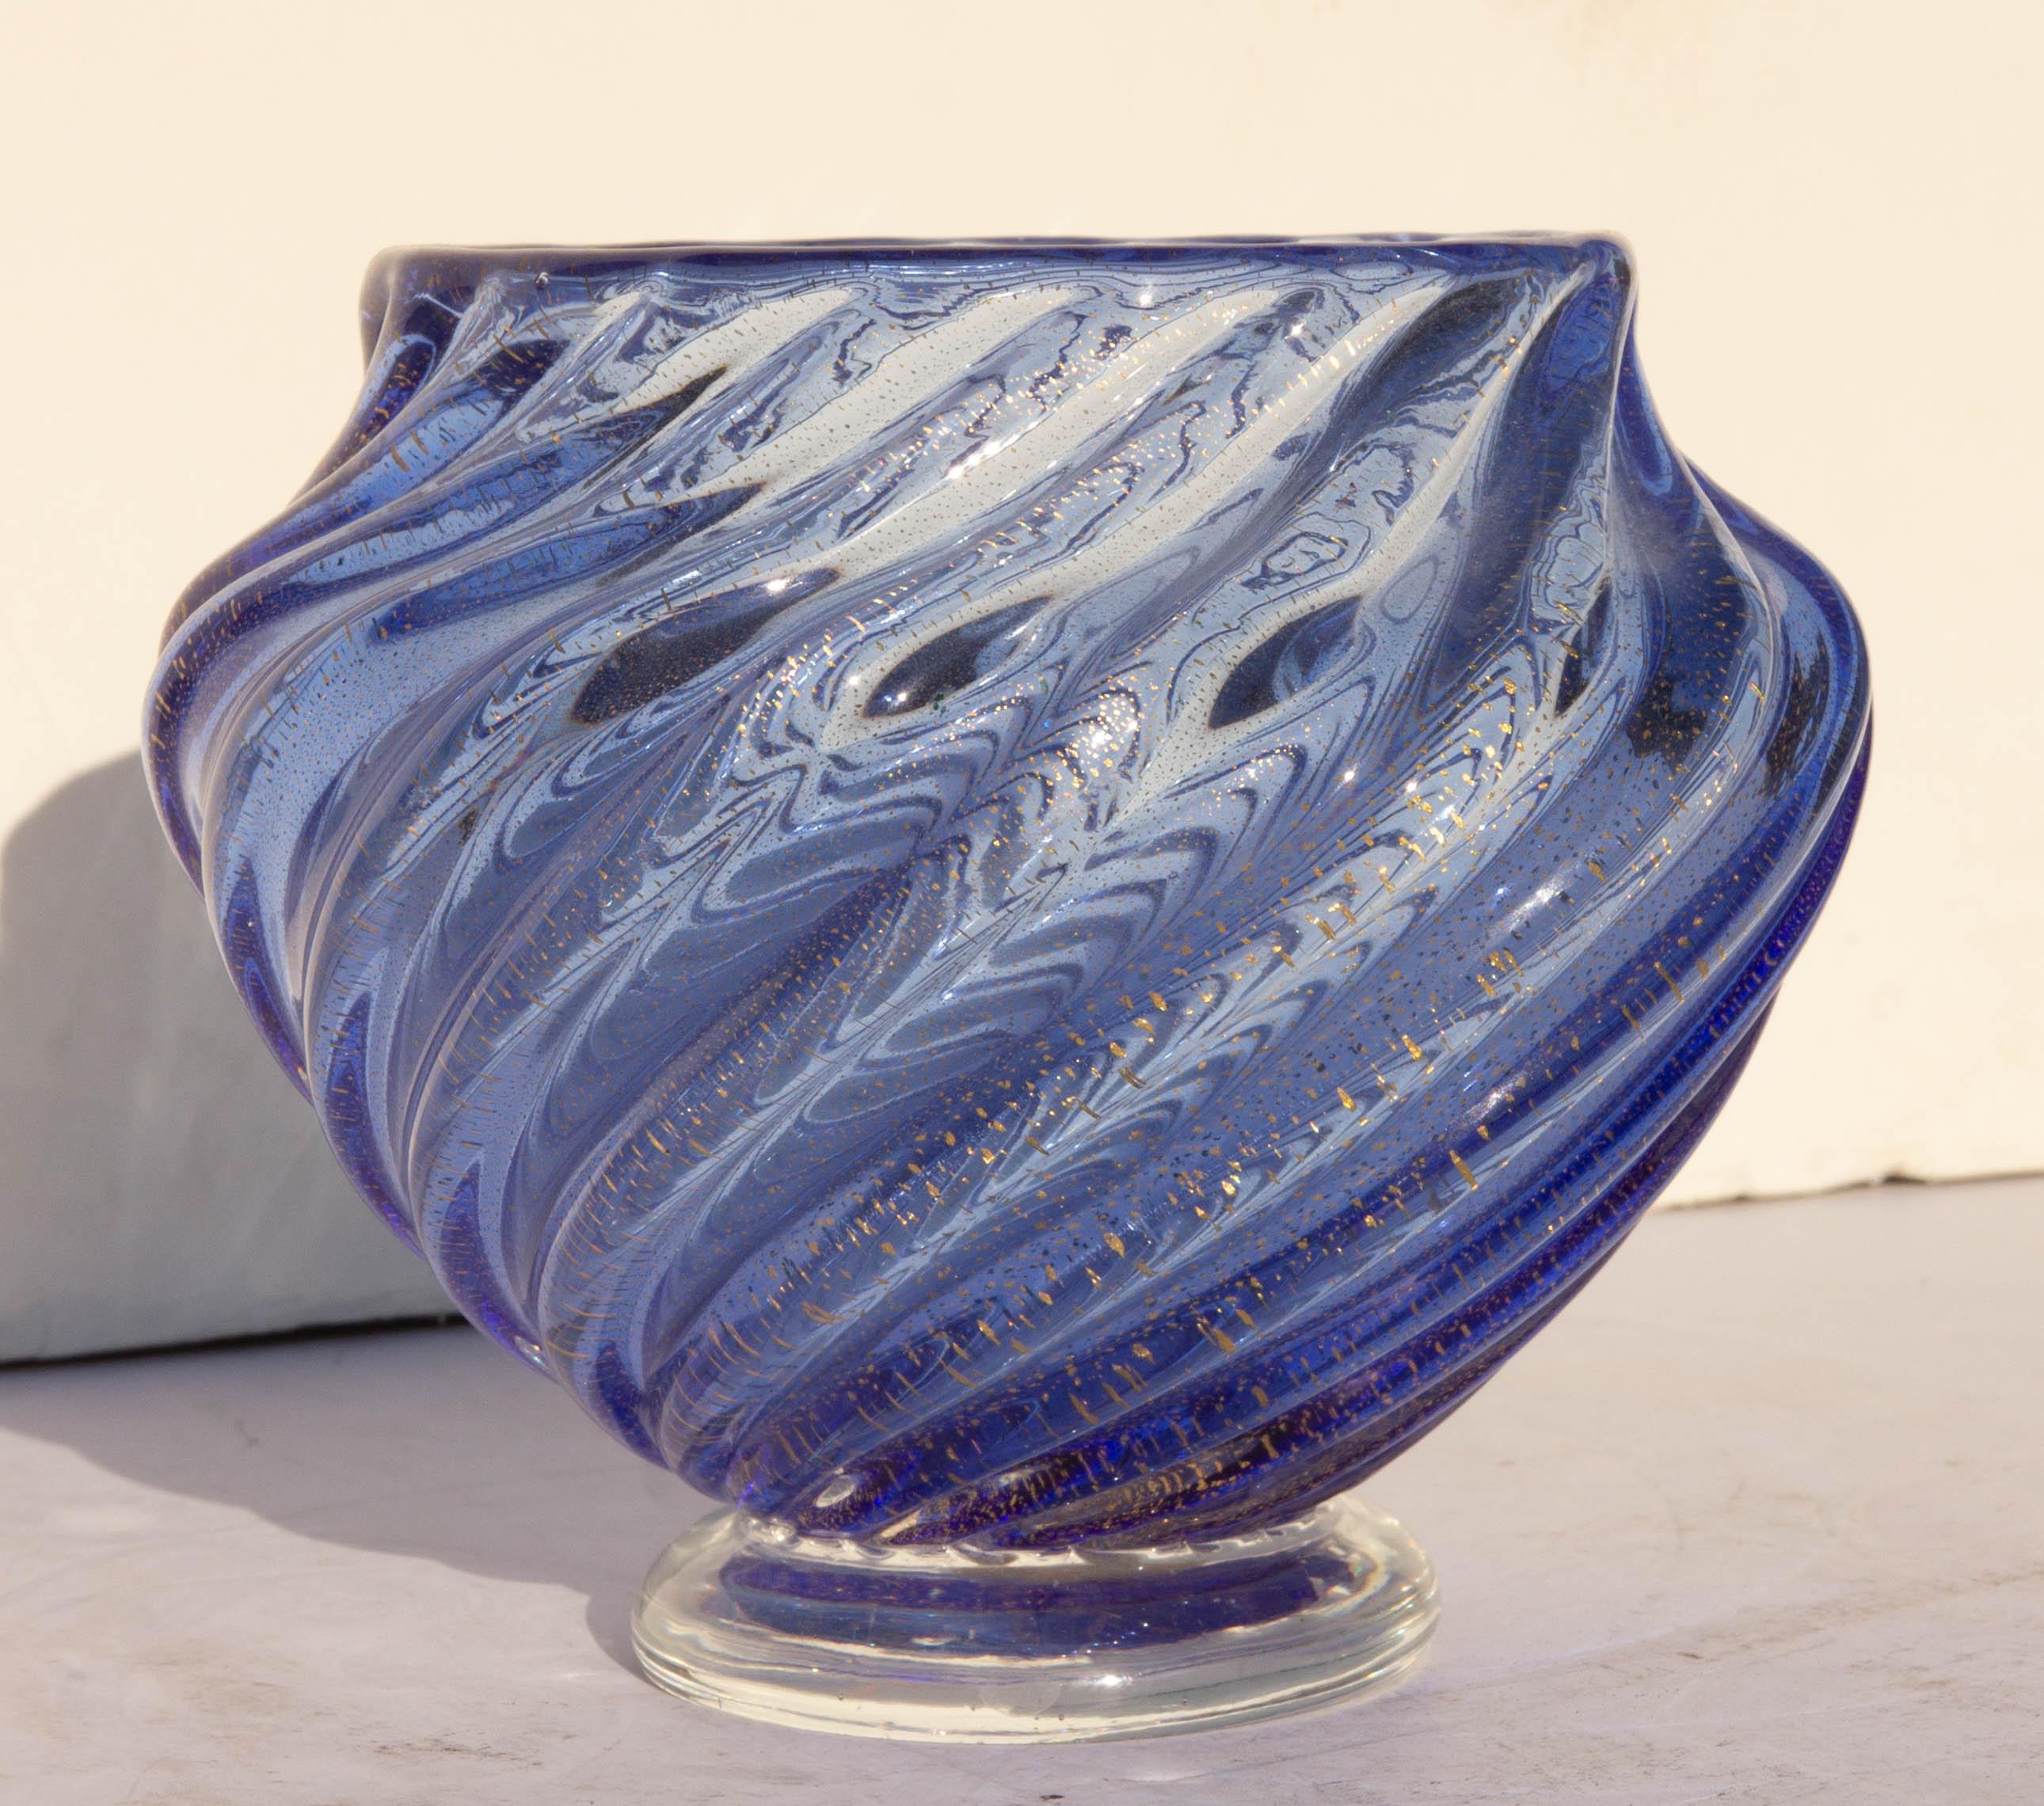 Vintage Venetian glass swirled vase. Blue, and clear glass with gold flecks. Original Murano label on bottom. Mid-20th century.